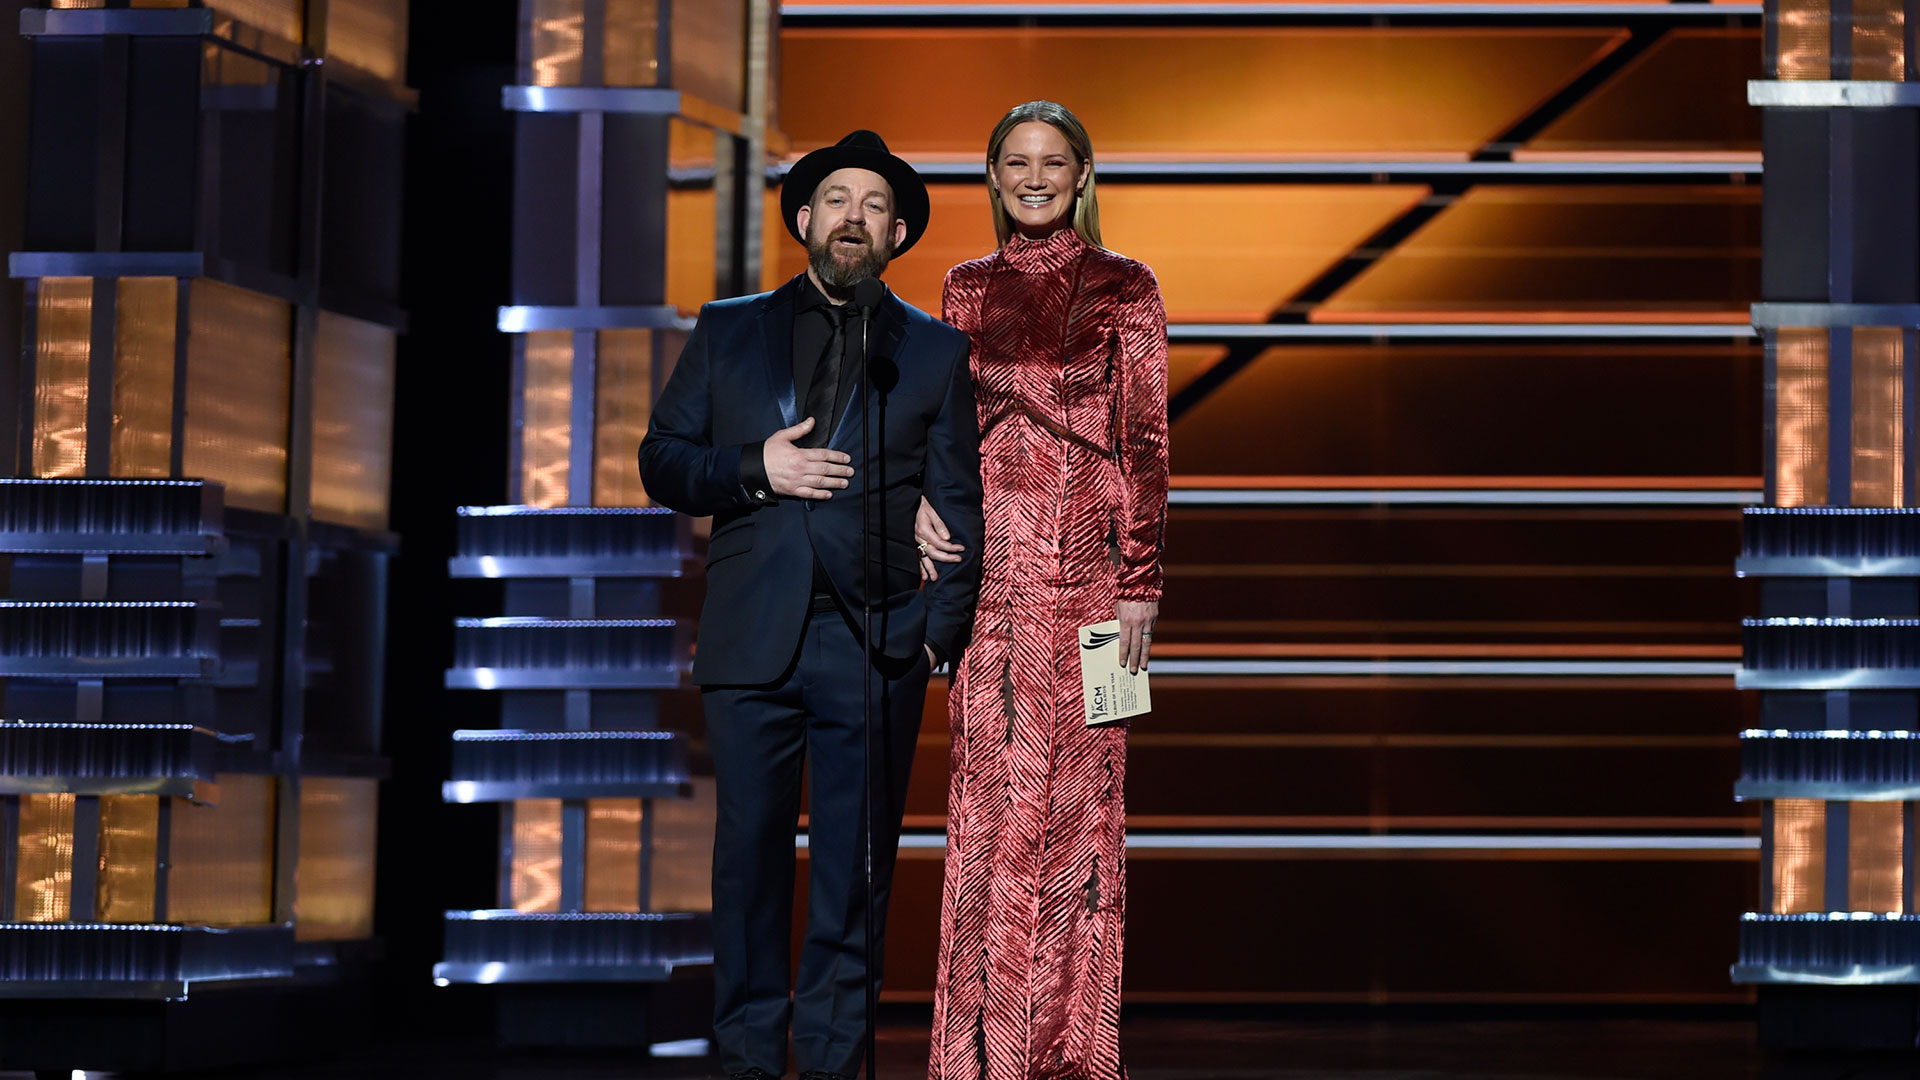 From A Room: Vol. 1 by Chris Stapleton wins Album of the Year at the 53rd ACM Awards.